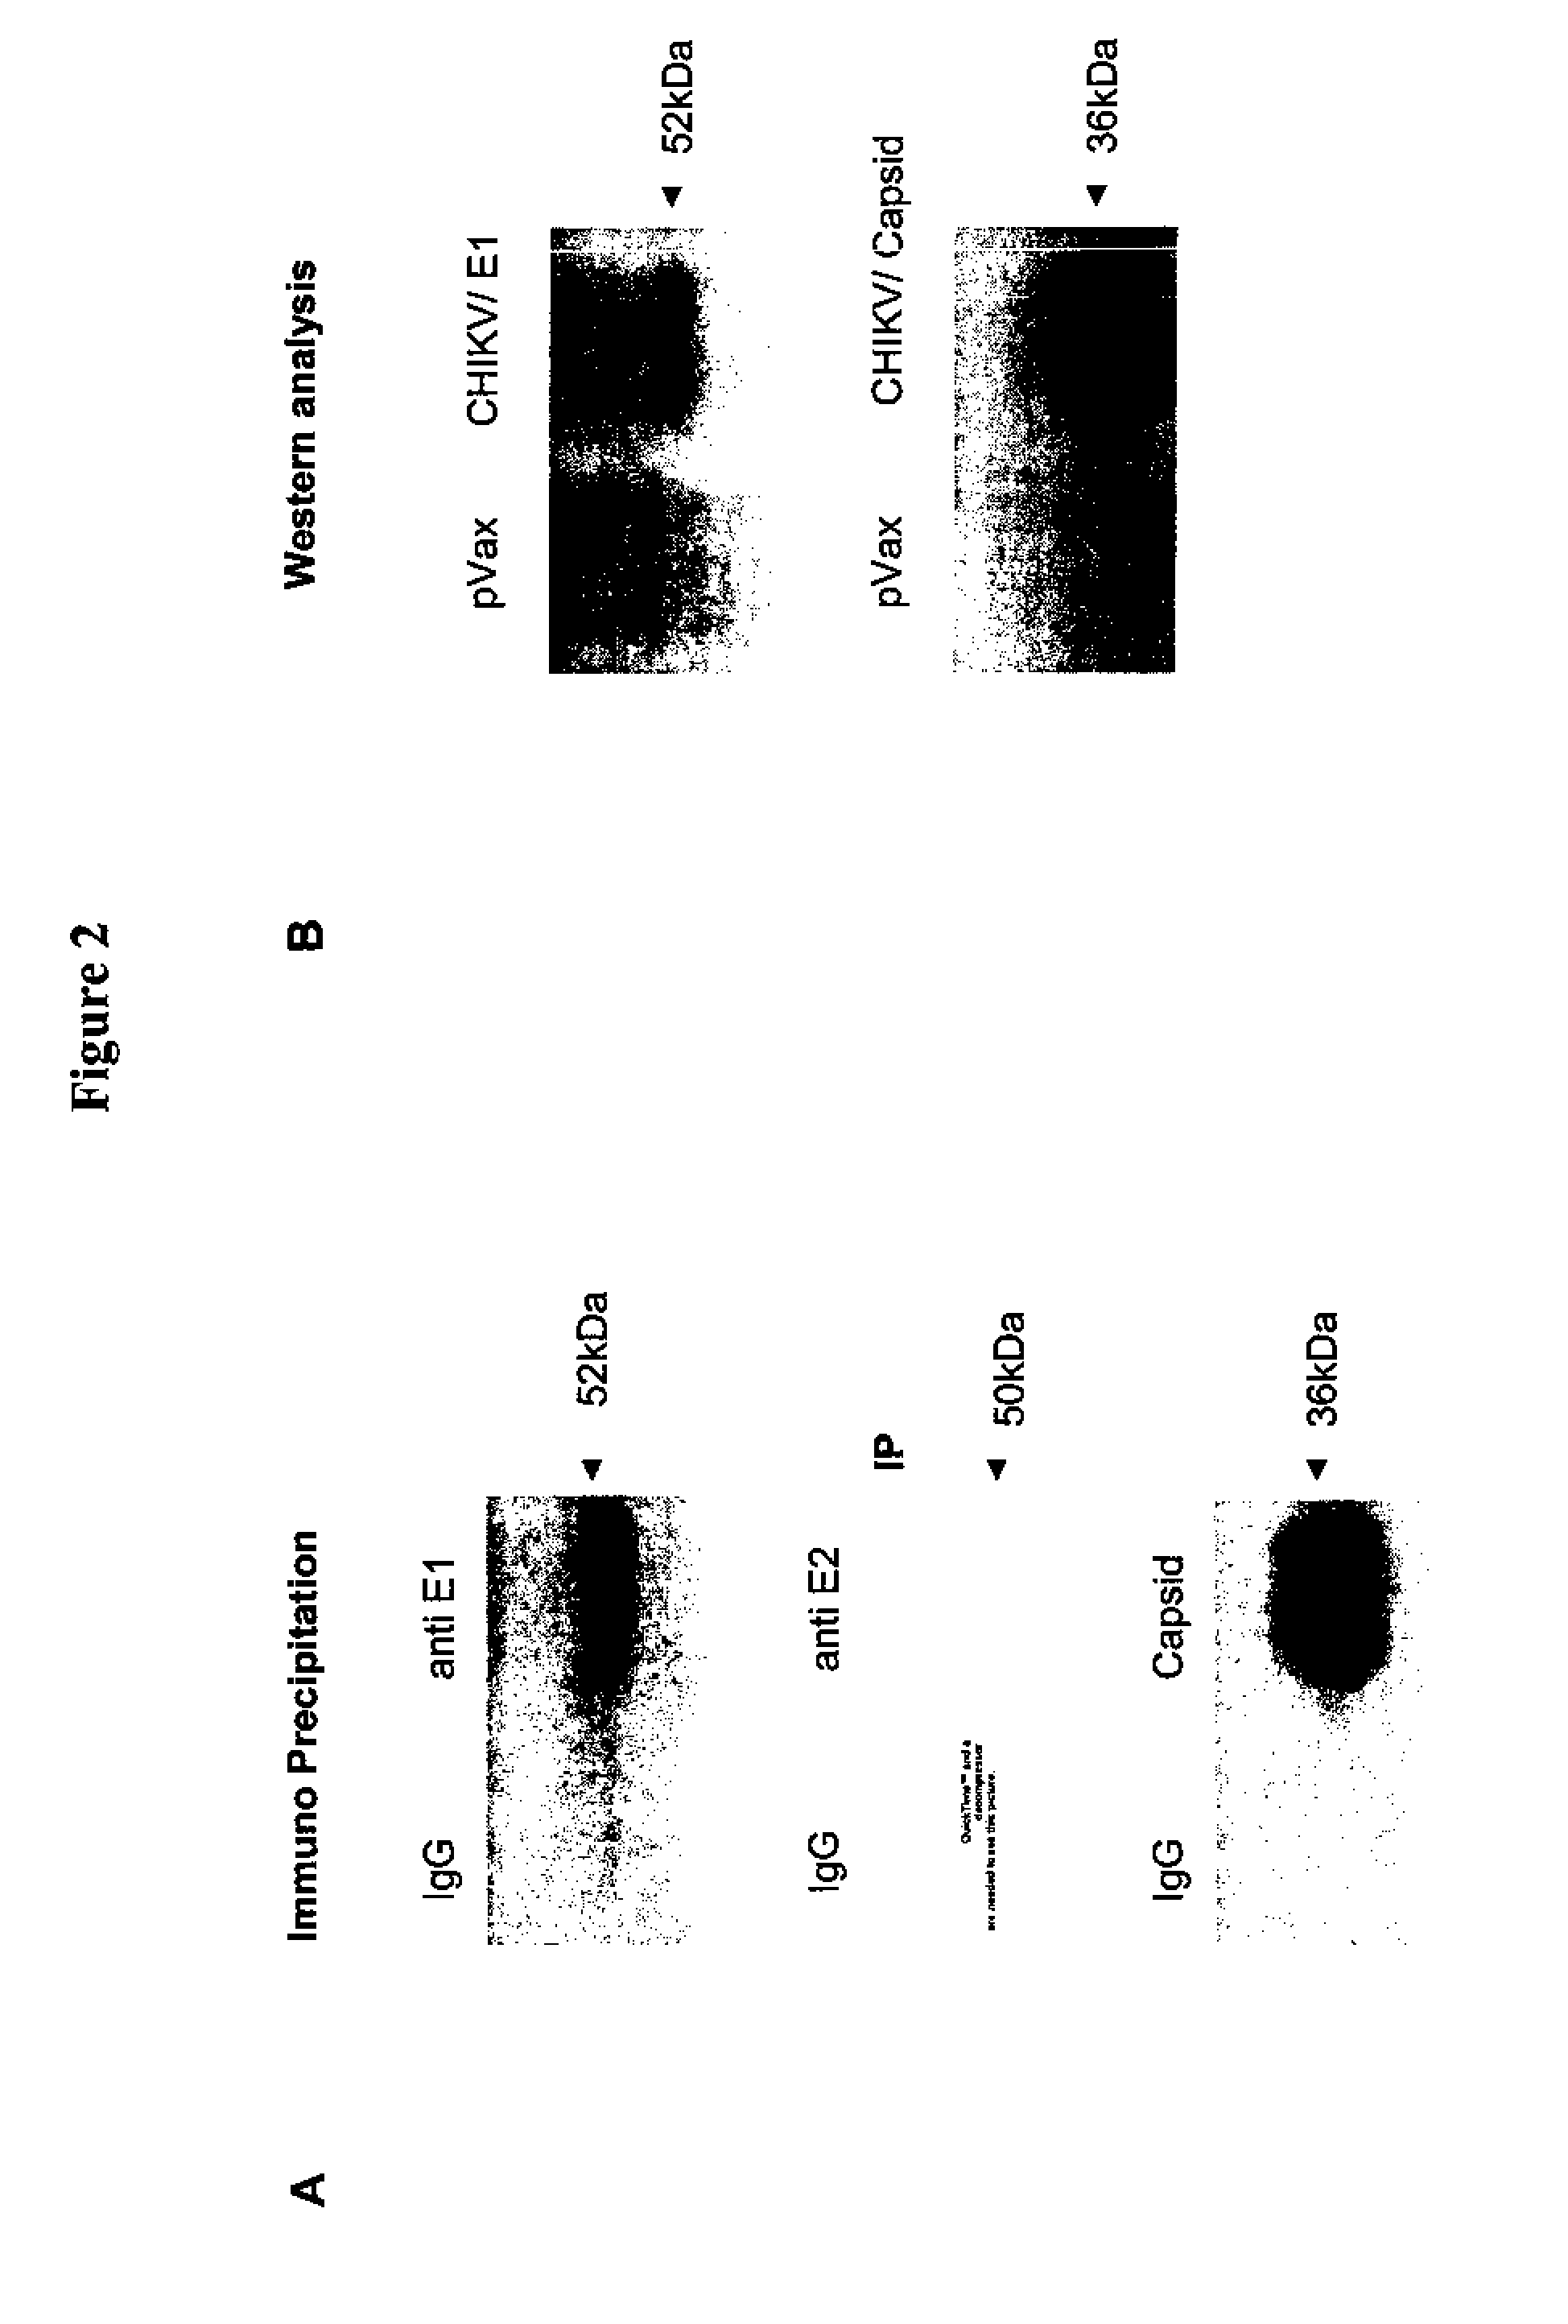 Consensus sequences of chikungunya viral proteins, nucleic acid molecules encoding the same, and compositions and methods for using the same